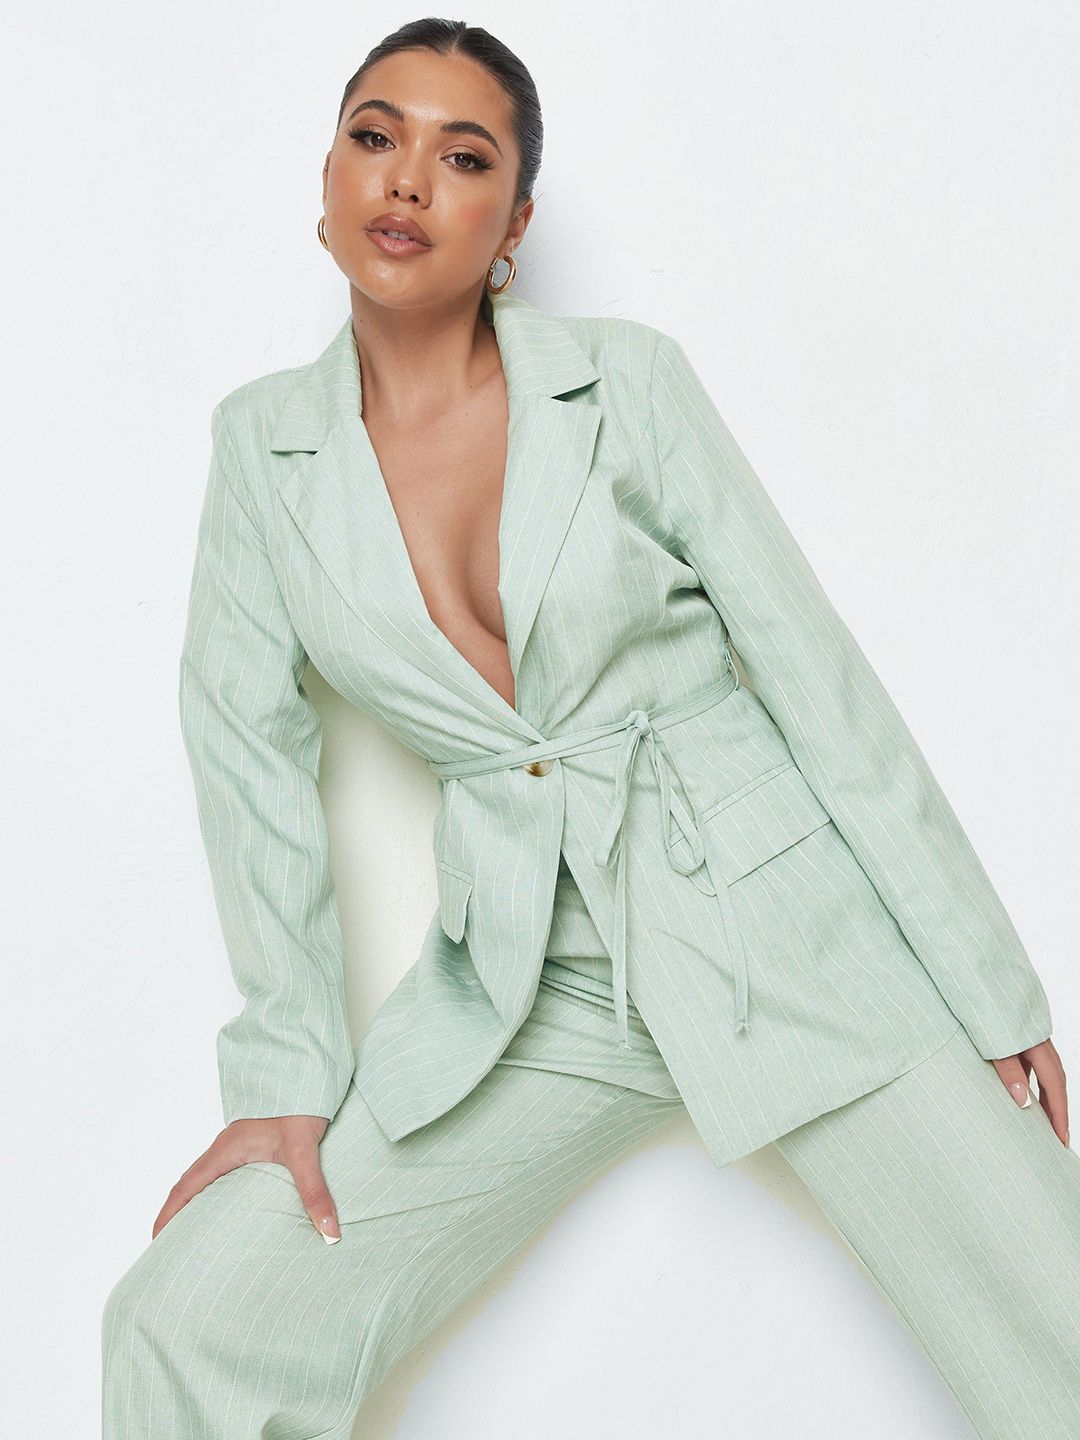 Missguided Women Powder Blue & White Striped Single-Breasted Blazer with Belt Price in India